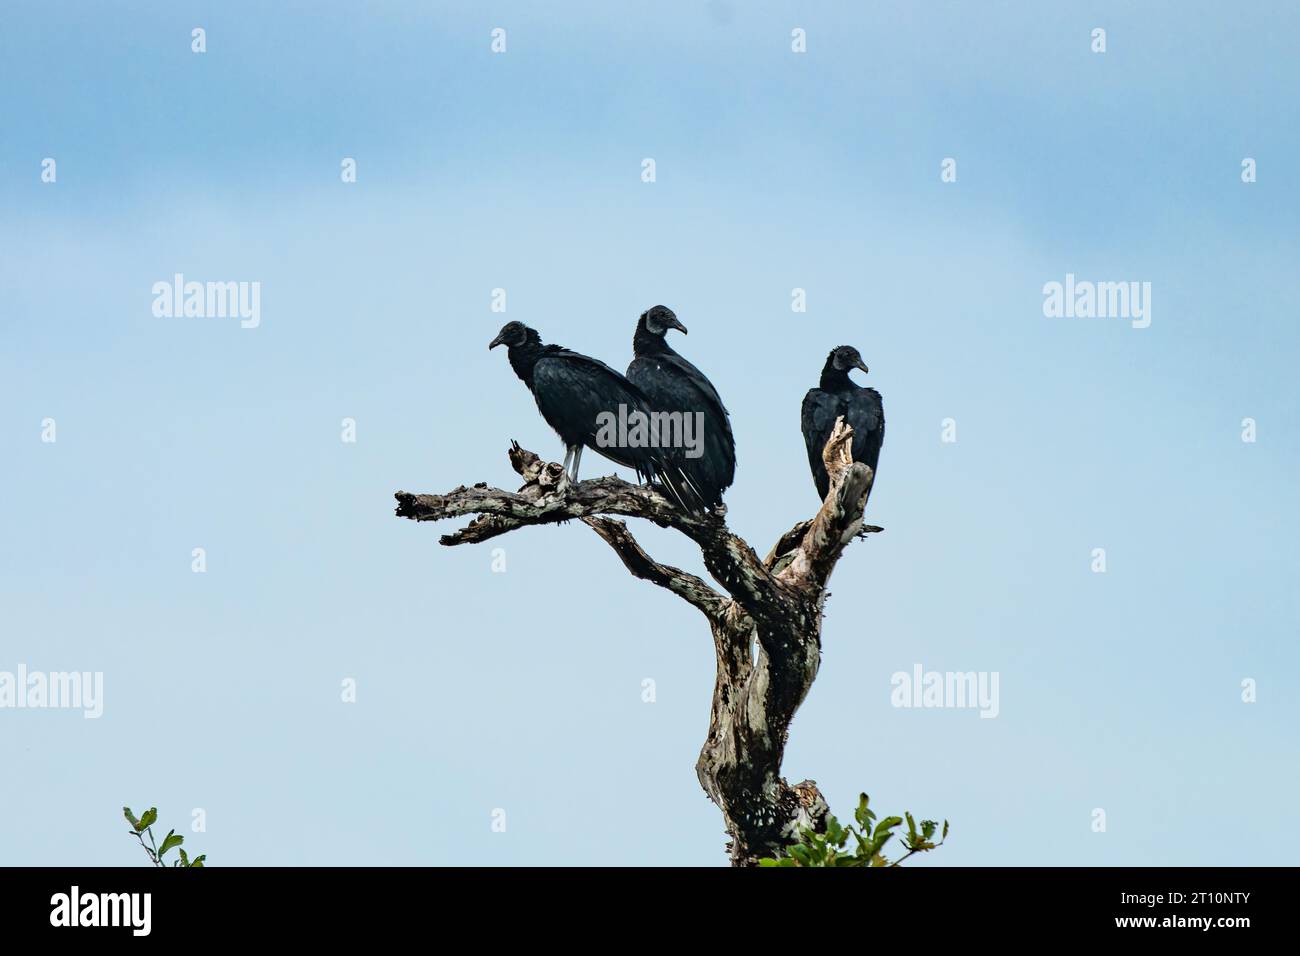 Black Vultures, Coragyps atratus, in a dead tree by the New River in the Orange Walk District, Belize. Stock Photo